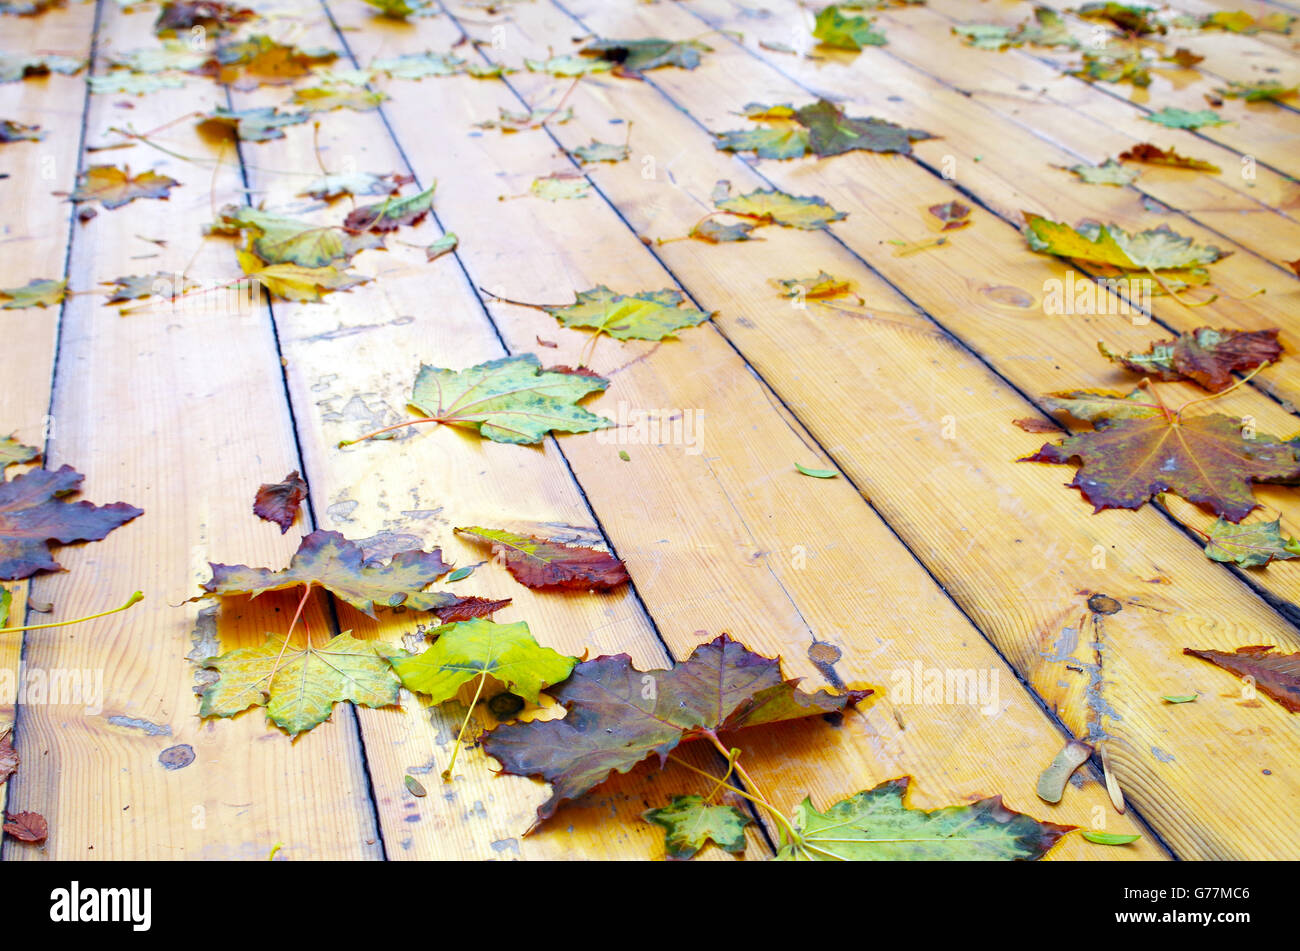 Close up view on a wet green and yellow leaves of maple and chestnut trees with shallow depth of focus on the wet wooden platfor Stock Photo